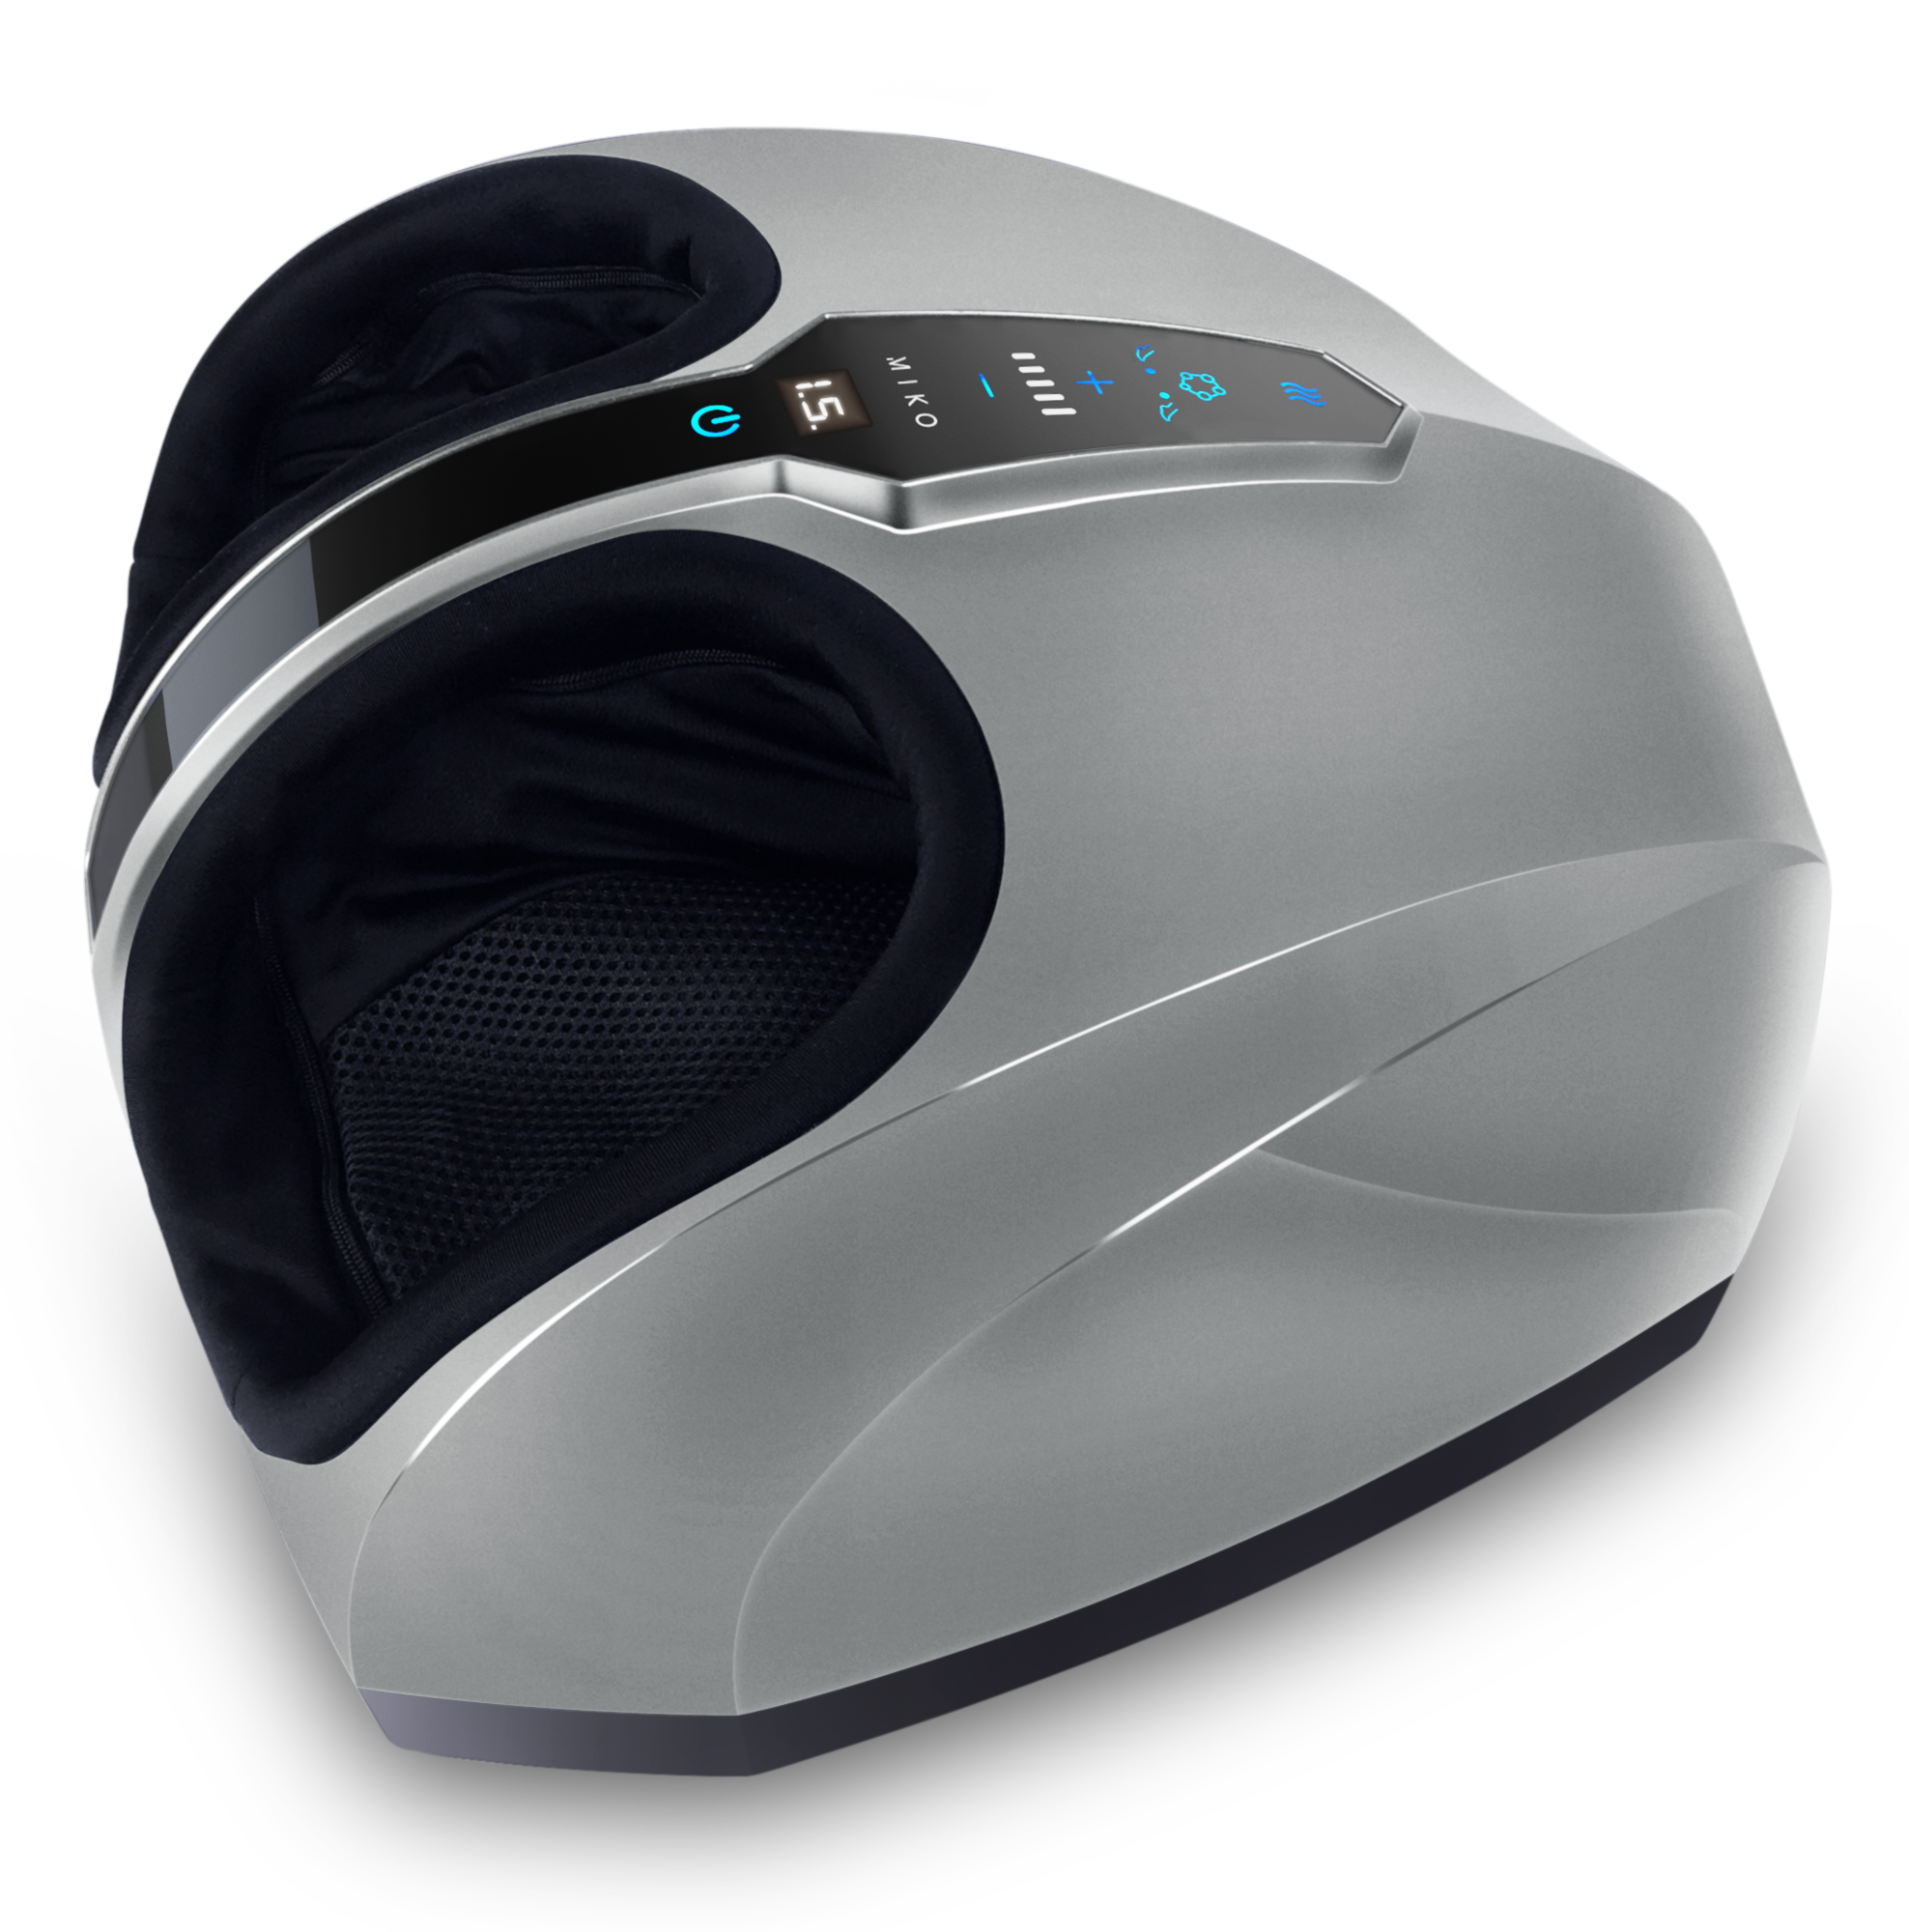 Miko Shiatsu Foot Massager Machine Kneading and Rolling with Heat and Pressure Settings, Silver, Includes 2 Remotes - image 3 of 7